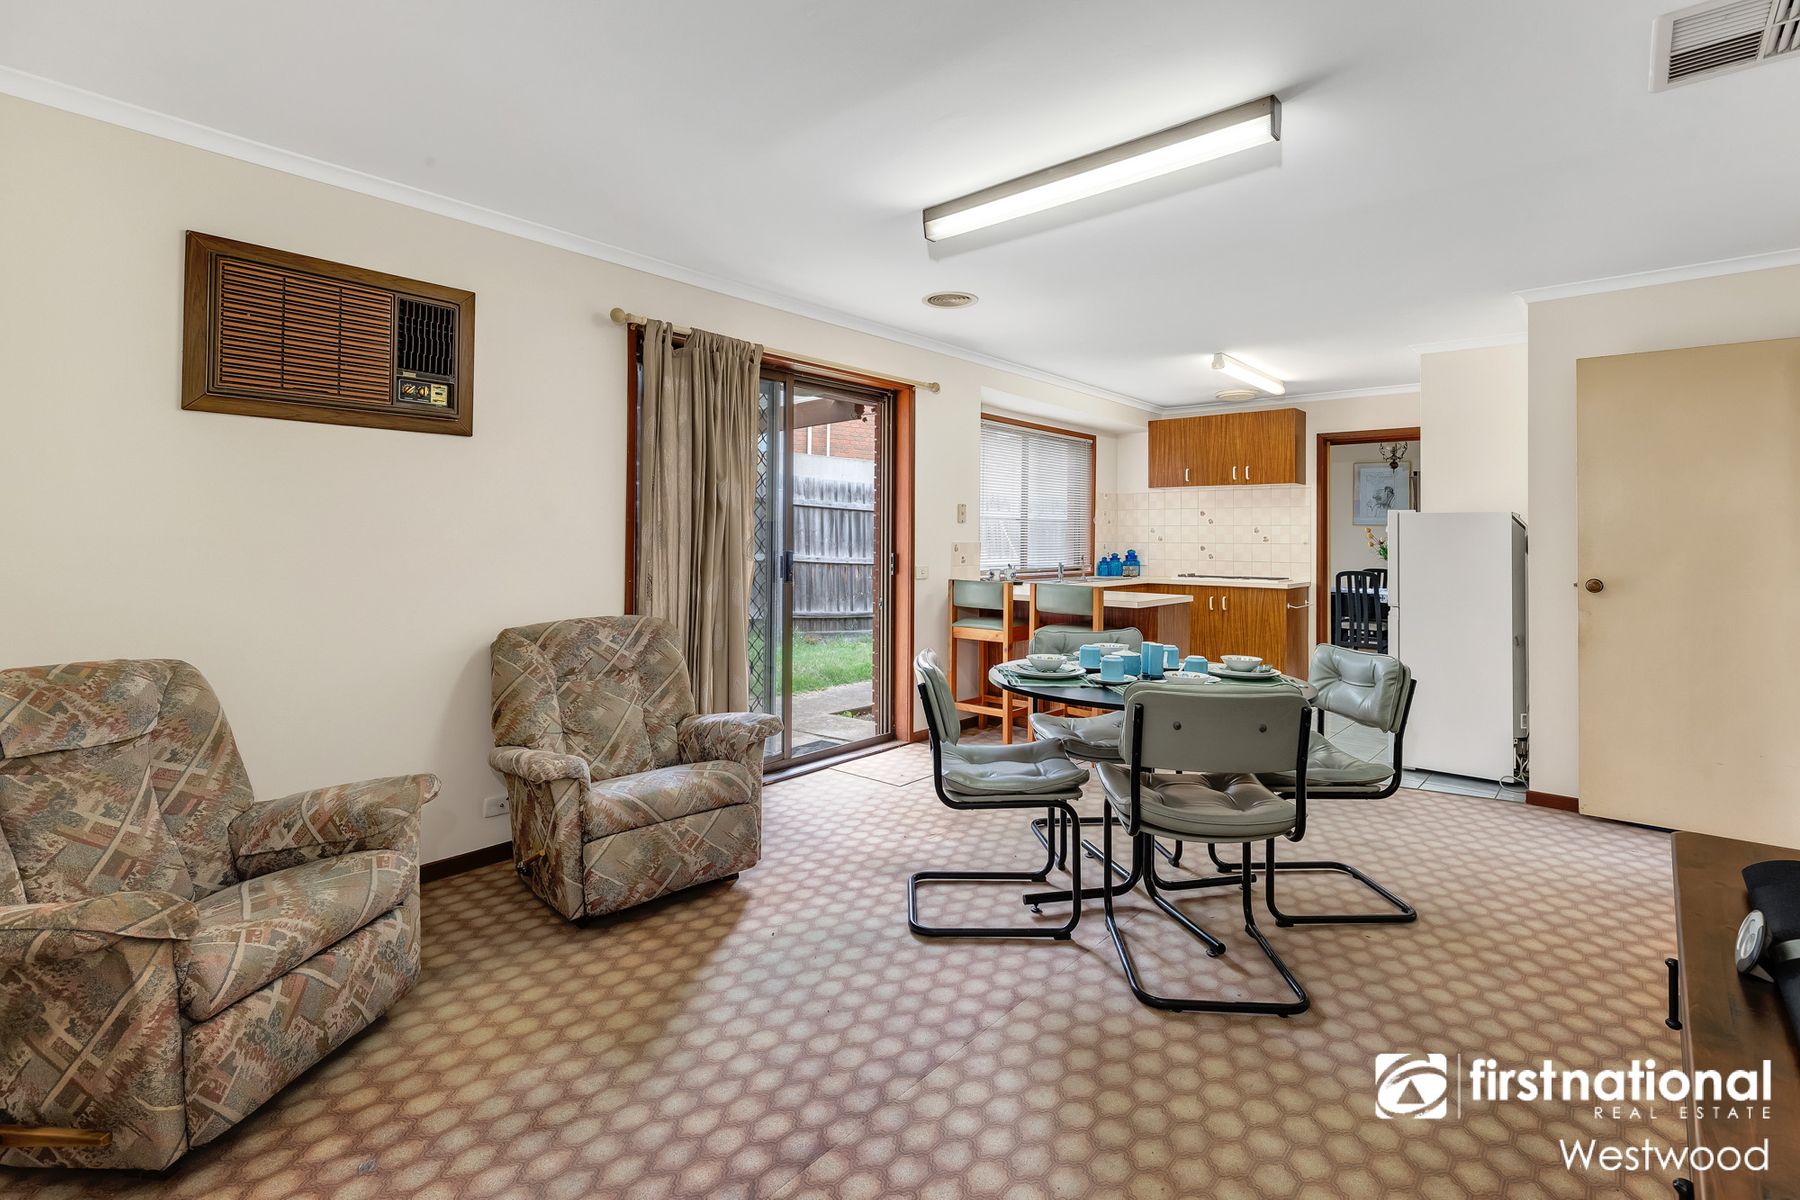 77 Barber Drive, Hoppers Crossing, VIC 3029